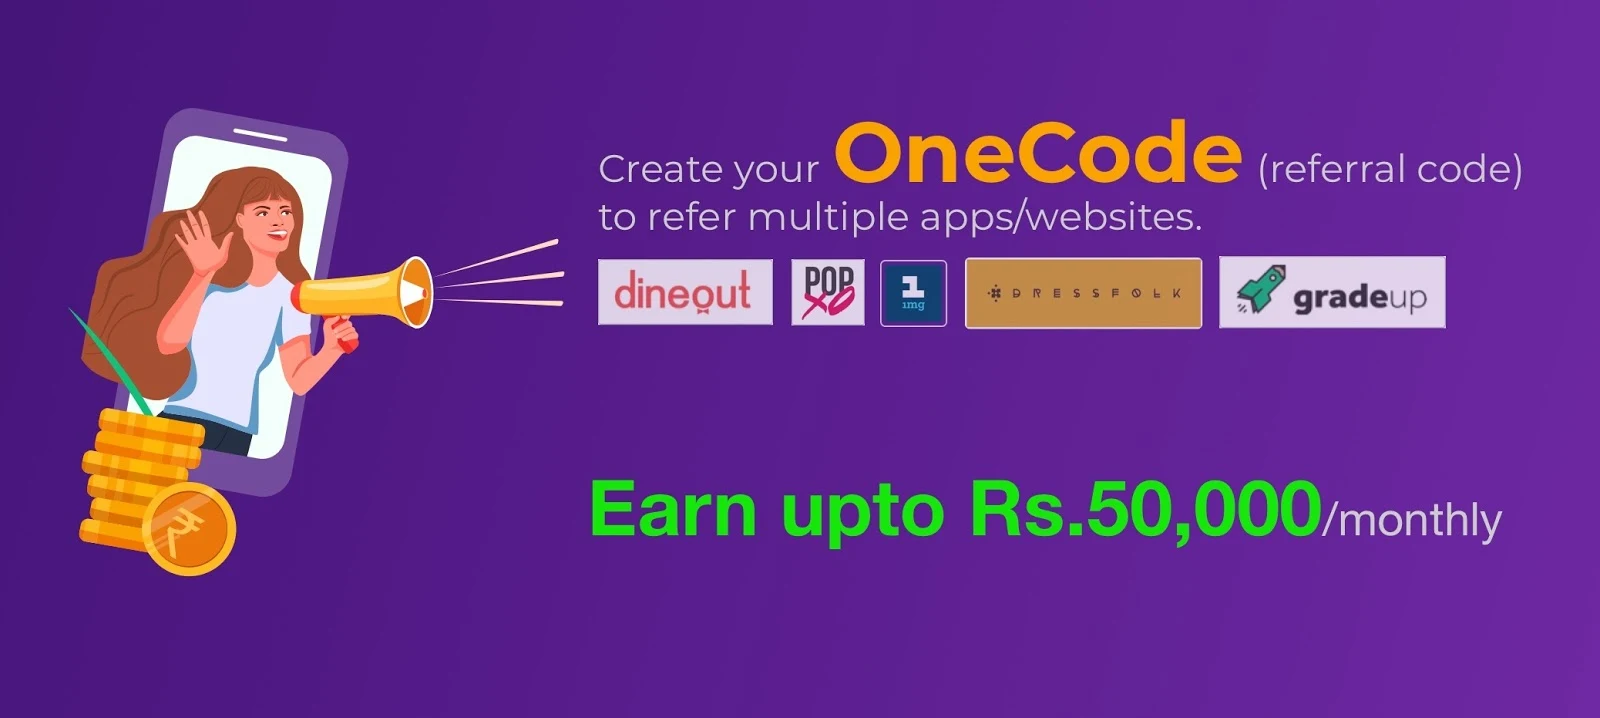 OneCode Refer and earn money using special discount code